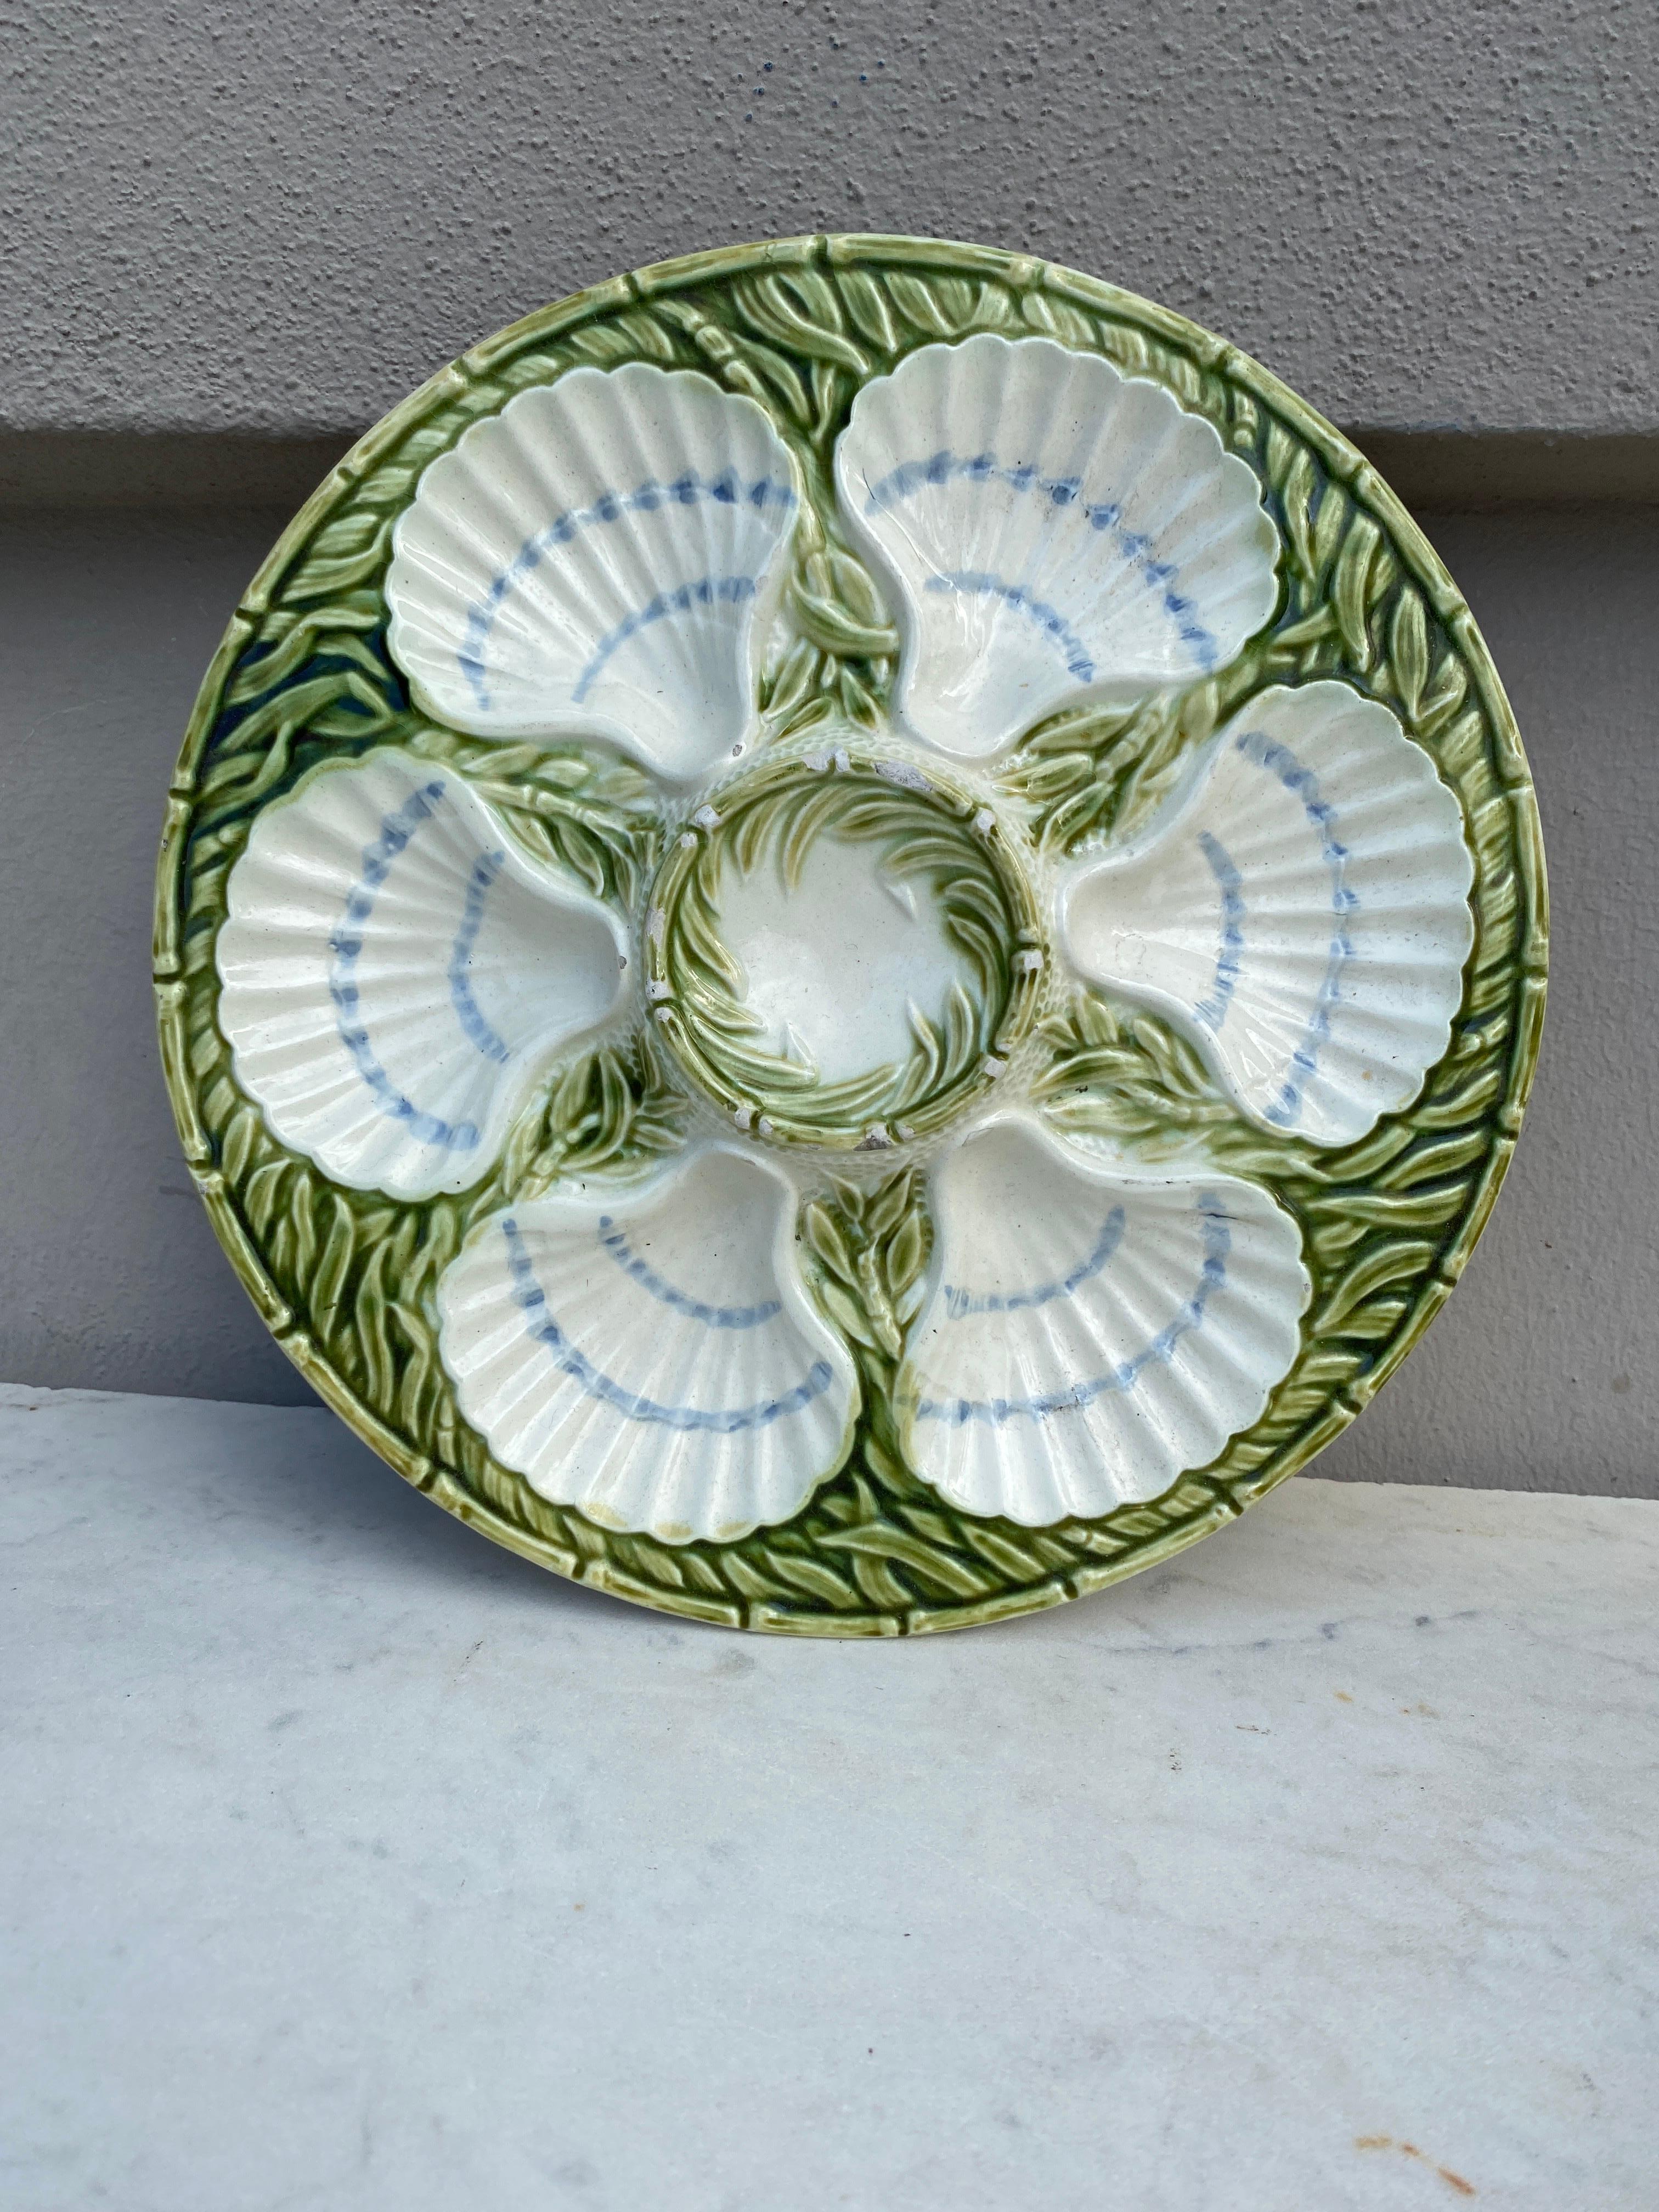 French Majolica oyster plate with bamboo patten and berries from the manufacture of Salins, circa 1890.